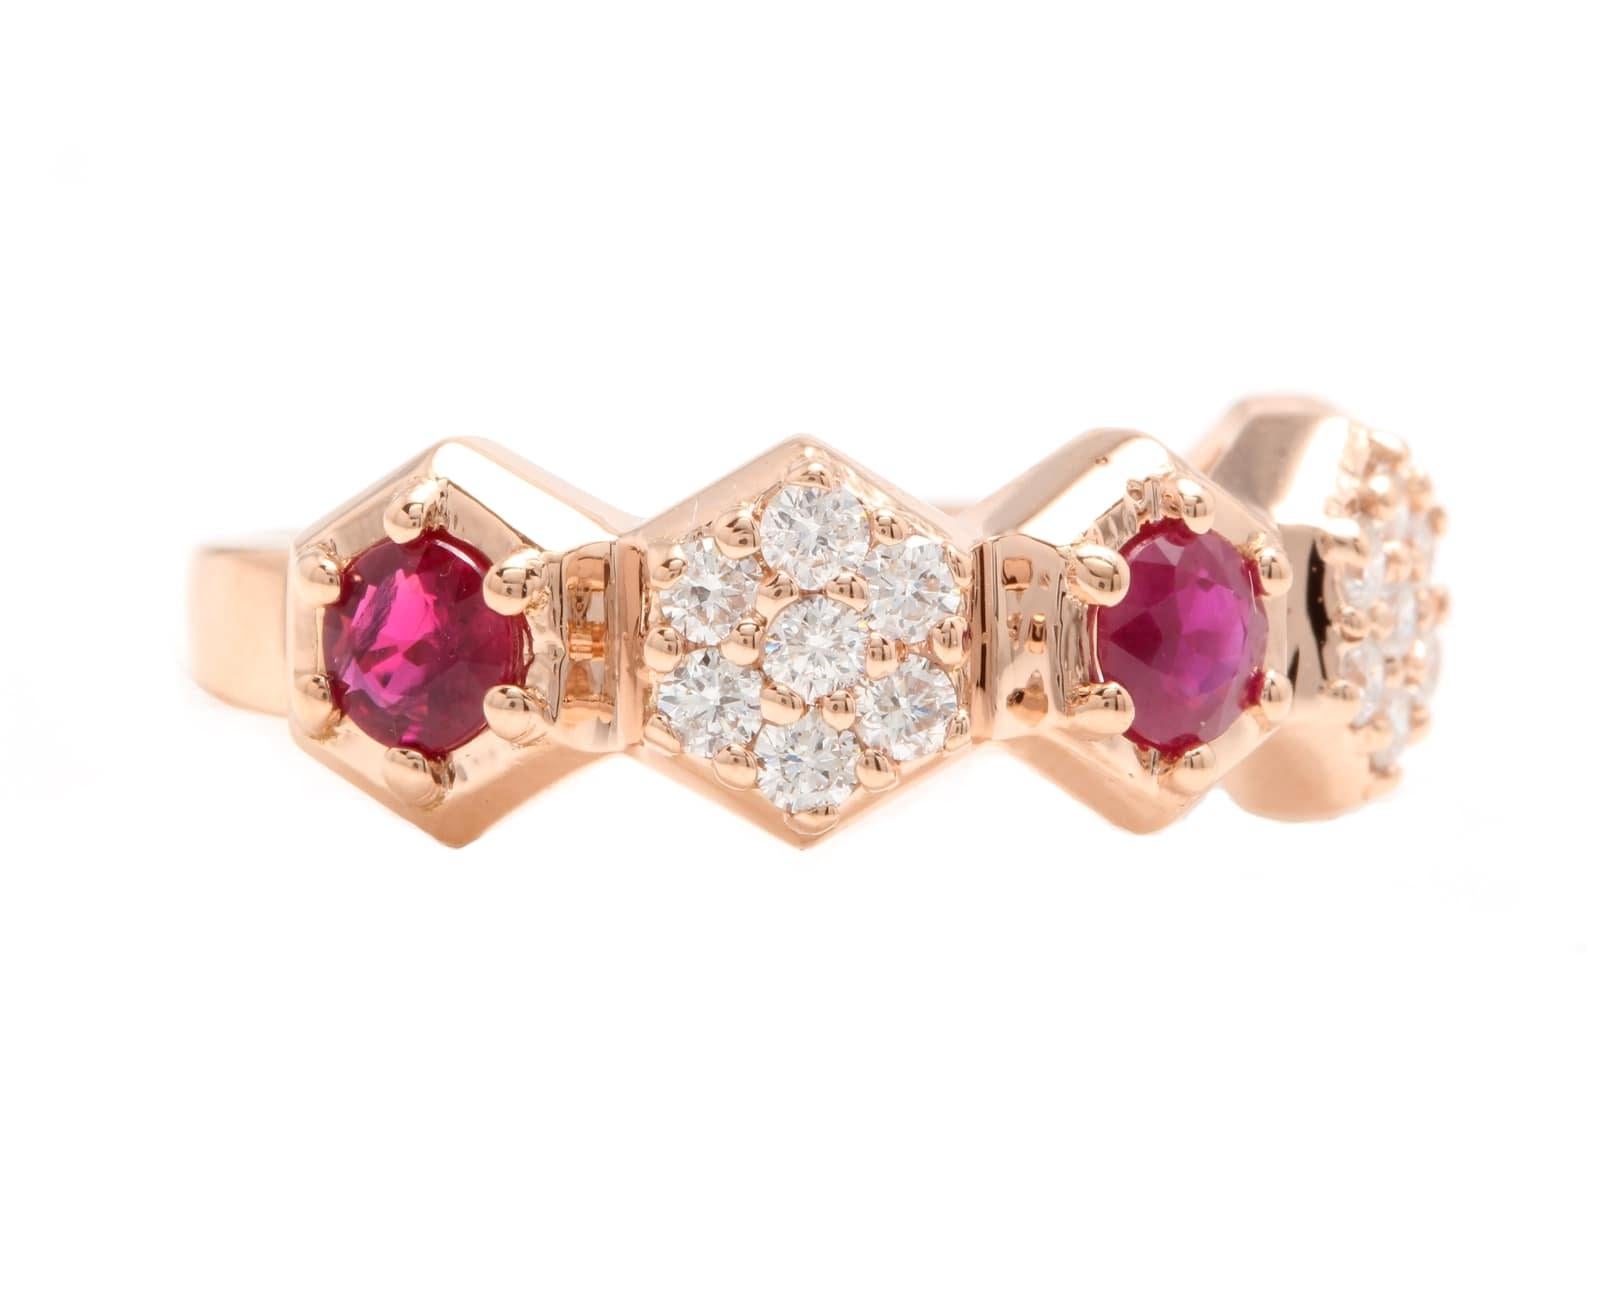 1.40 Carats Impressive Natural Ruby and Natural Diamond 14K Solid Rose Gold Ring

Suggested Replacement Value: Approx. $4,000.00

Total Natural Red Ruby Weight is: Approx. 1.00 Carat

Ruby Treatment: Heat 

Natural Round Diamonds Weight: Approx.